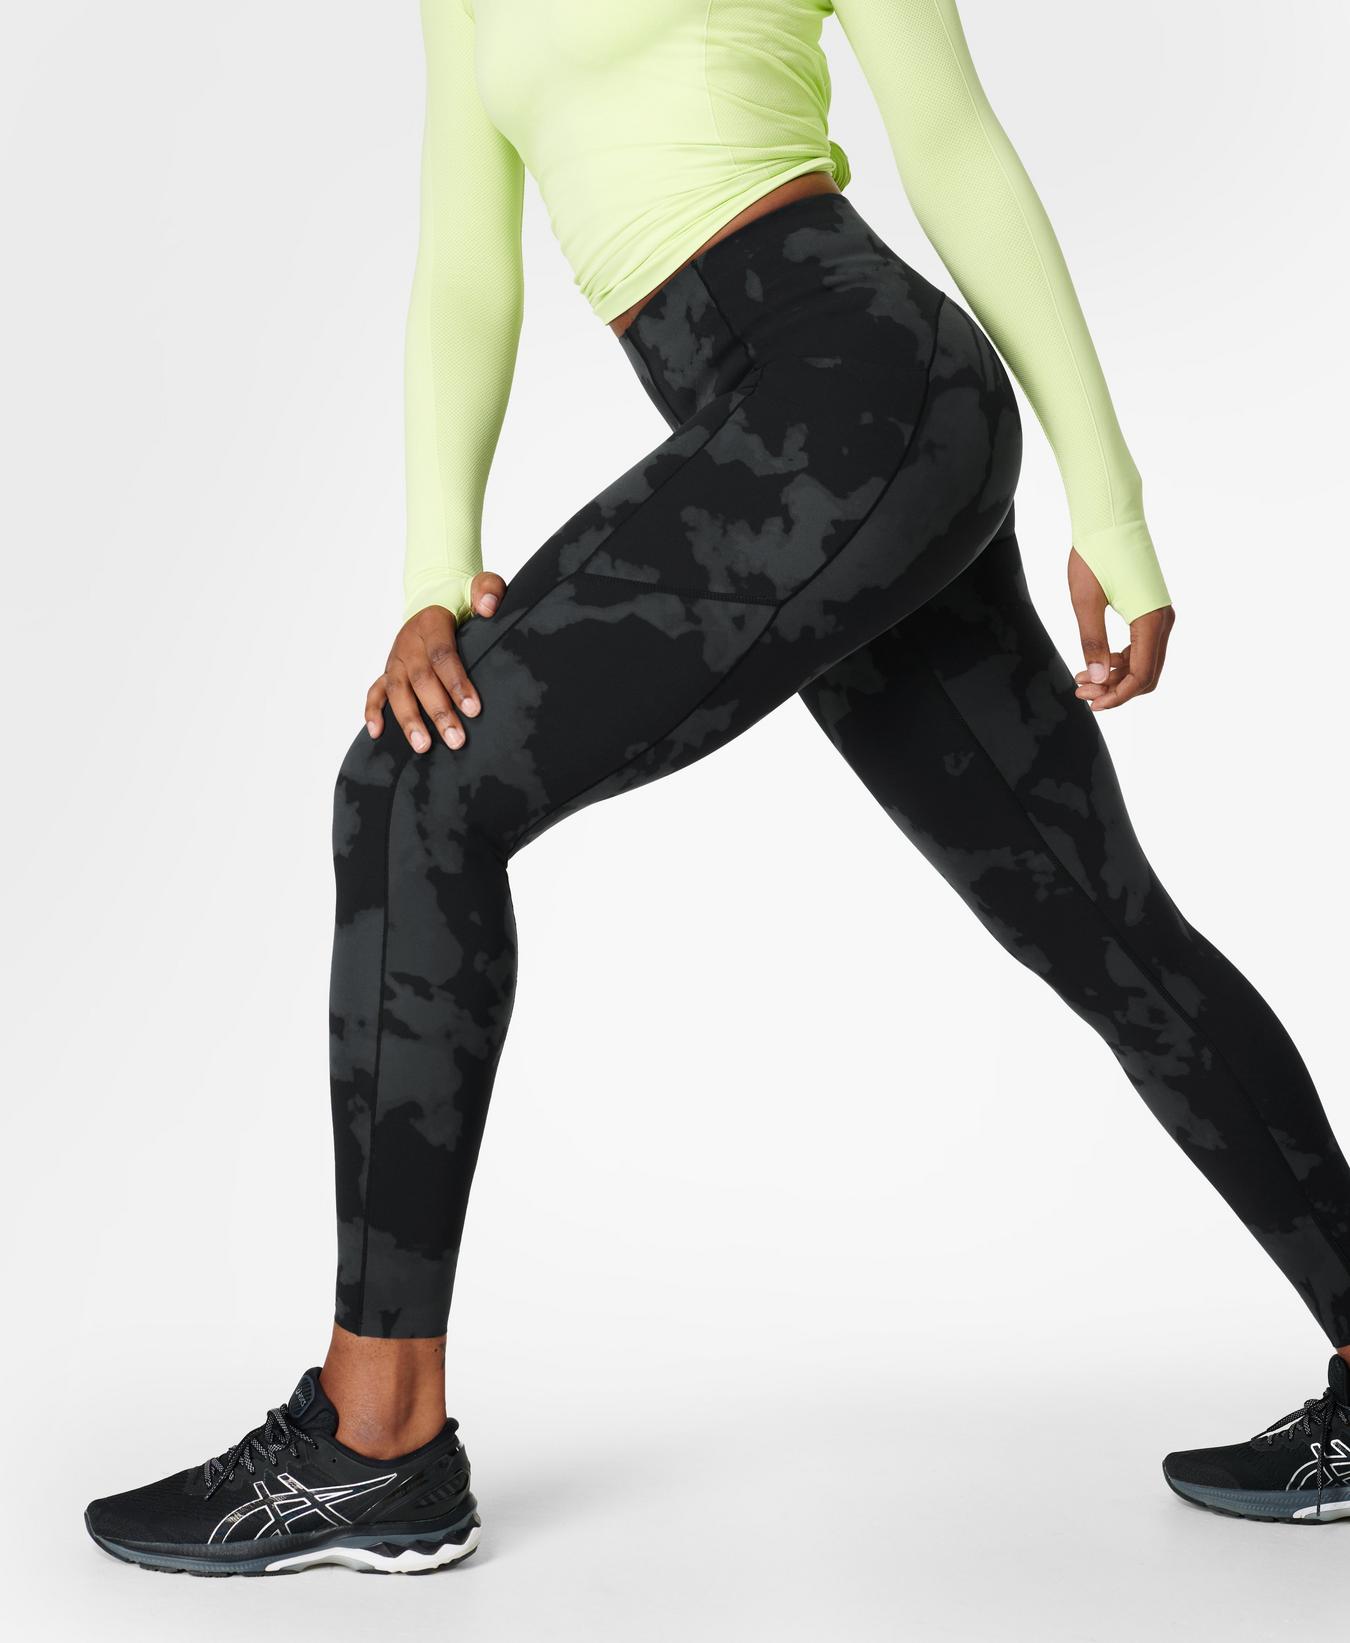 9 Best Amazon Leggings For Busy Moms - Motherly